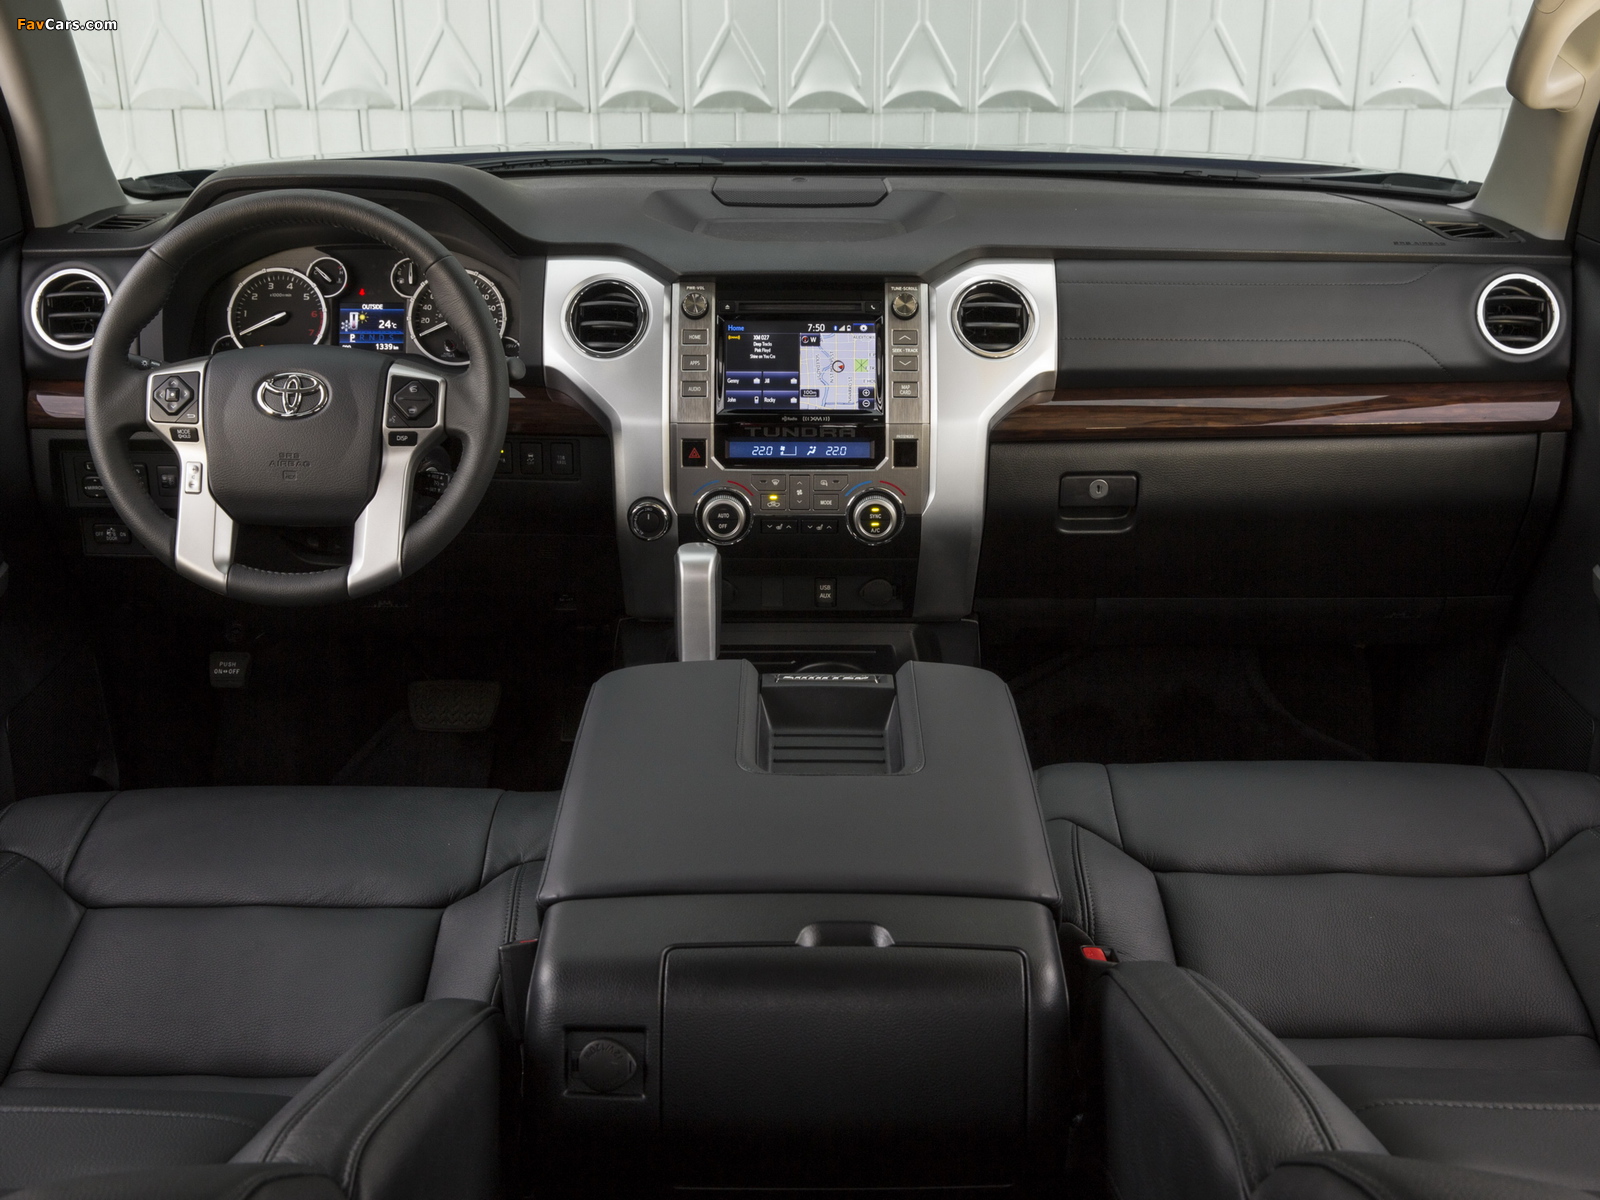 Toyota Tundra Double Cab Limited 2013 images (1600 x 1200)